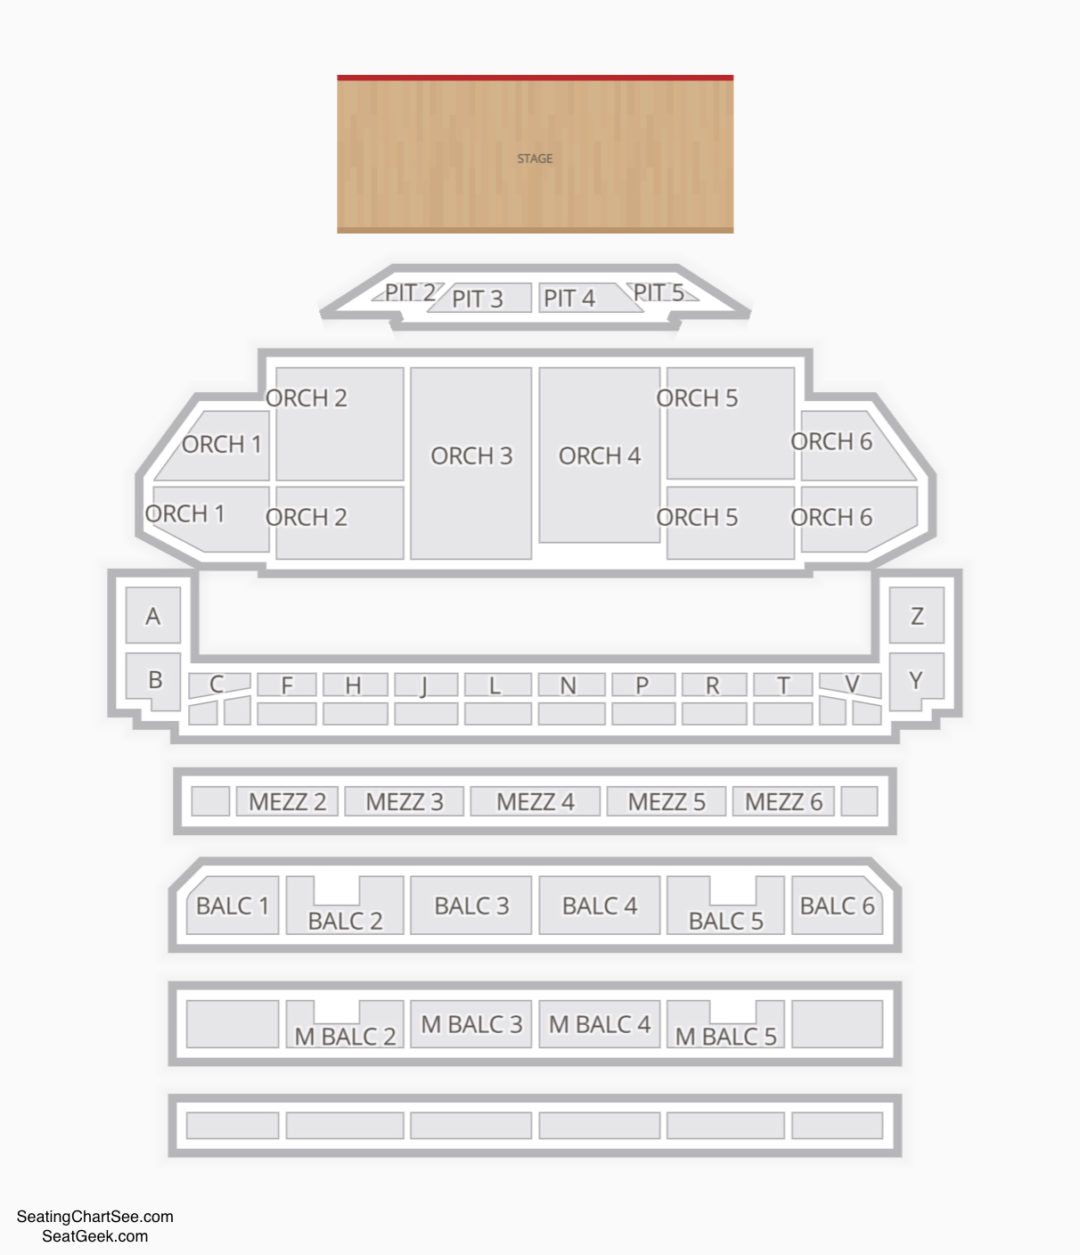 The Fabulous Fox Theatre St Louis Seating Chart | Seating Charts & Tickets